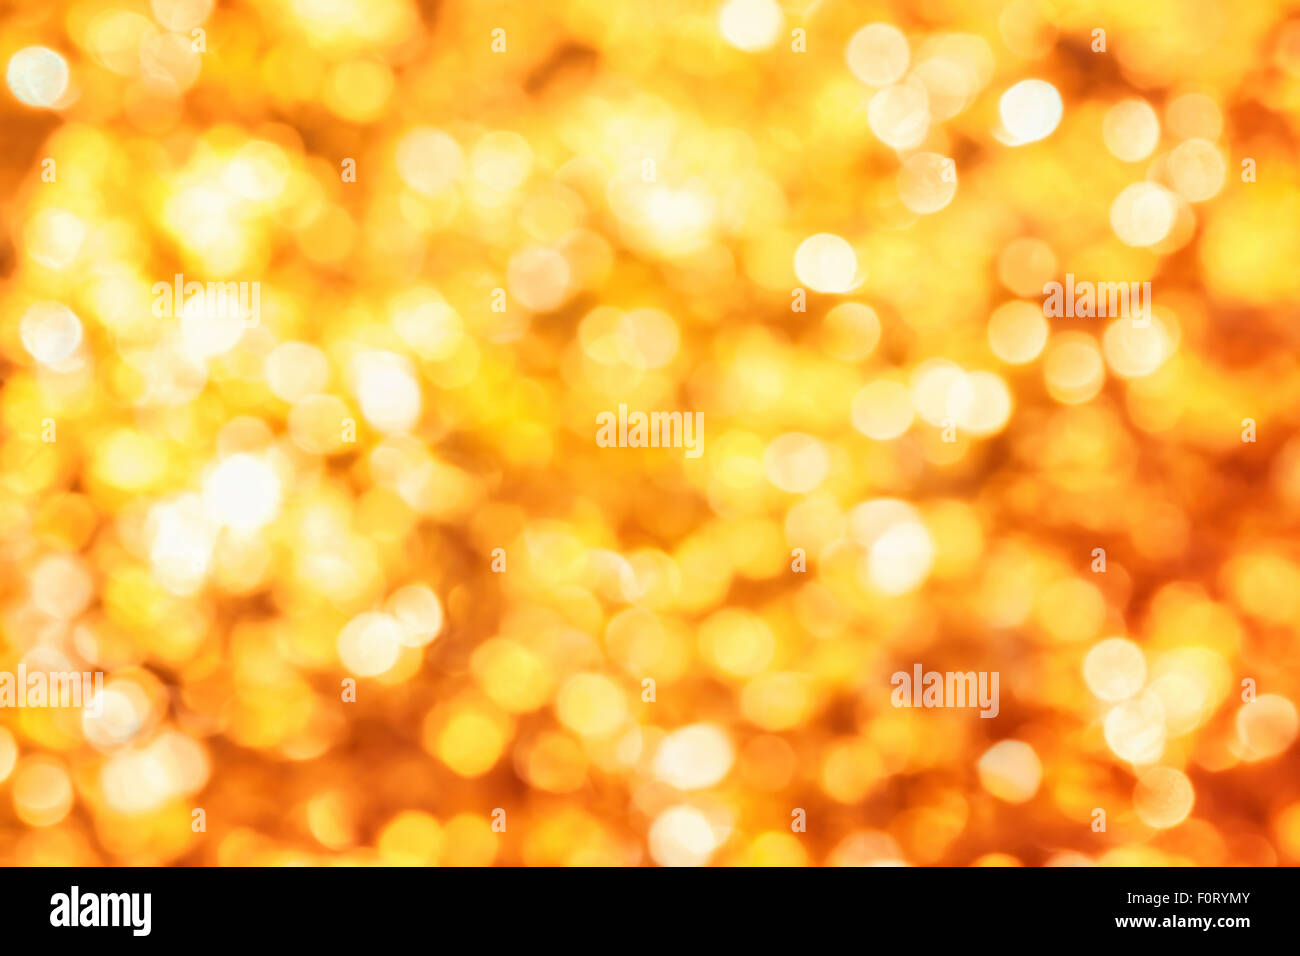 Shining out-of-focus highlights in gold leaves create a bright bokeh composition, ideal as a nature background Stock Photo